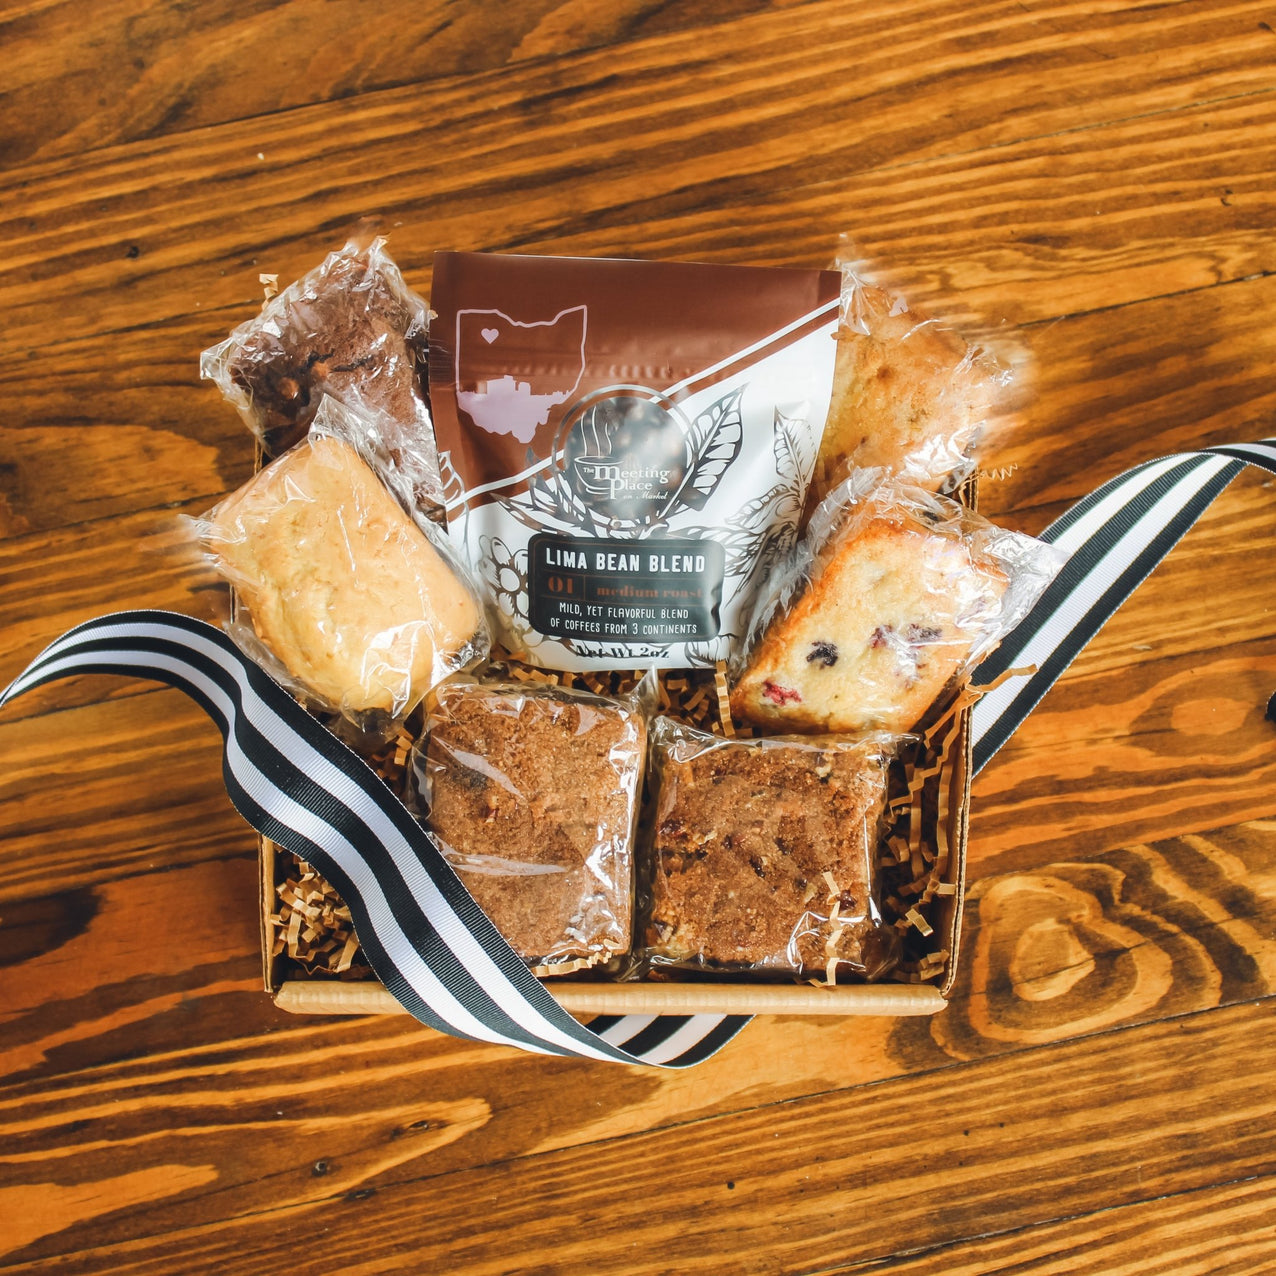 Father's Day Junior Breakfast Gift Basket with Dark Roast Coffee Father's Day Gift Basket - The Meeting Place on Market